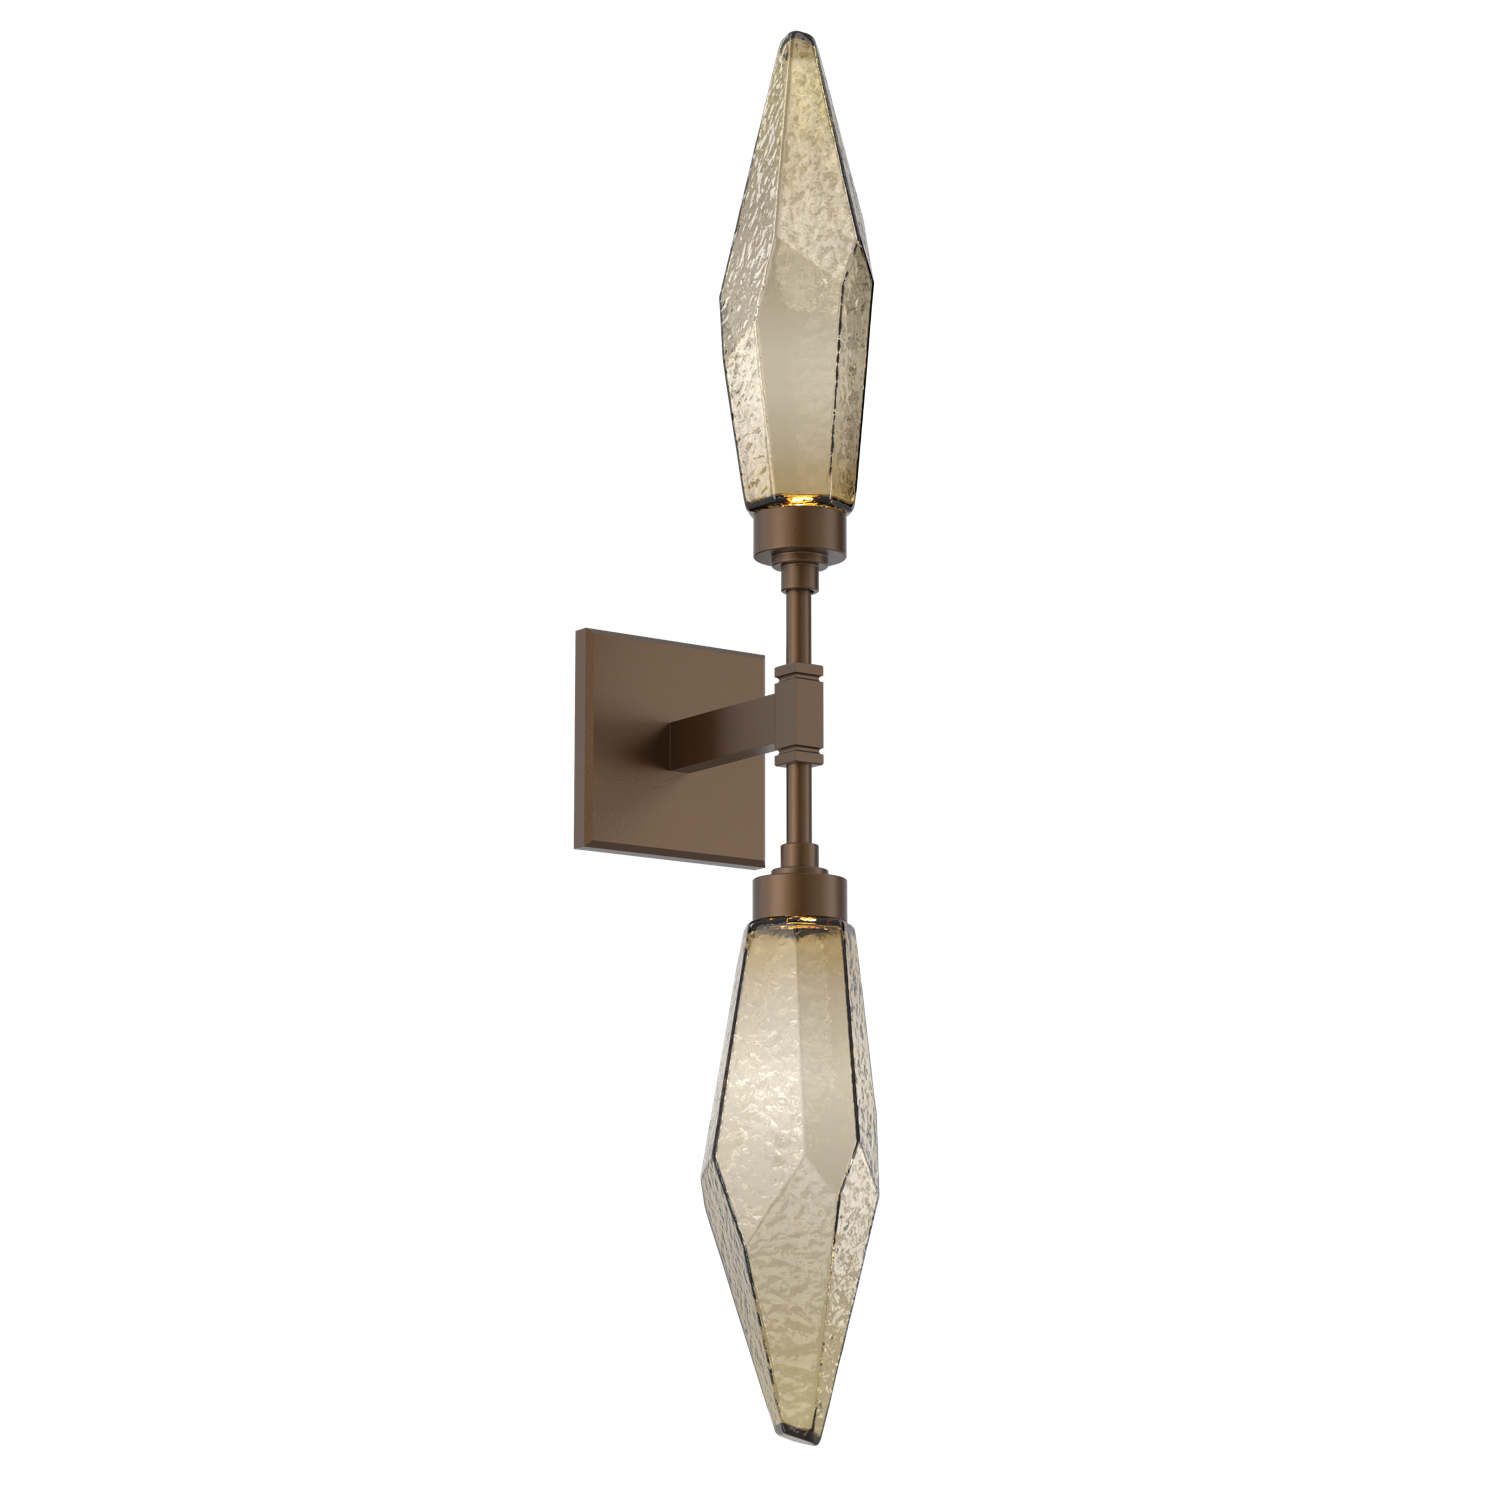 IDB0050-02-FB-CB-Hammerton-Studio-Rock-Crystal-wall-sconce-with-flat-bronze-finish-and-chilled-bronze-blown-glass-shades-and-LED-lamping